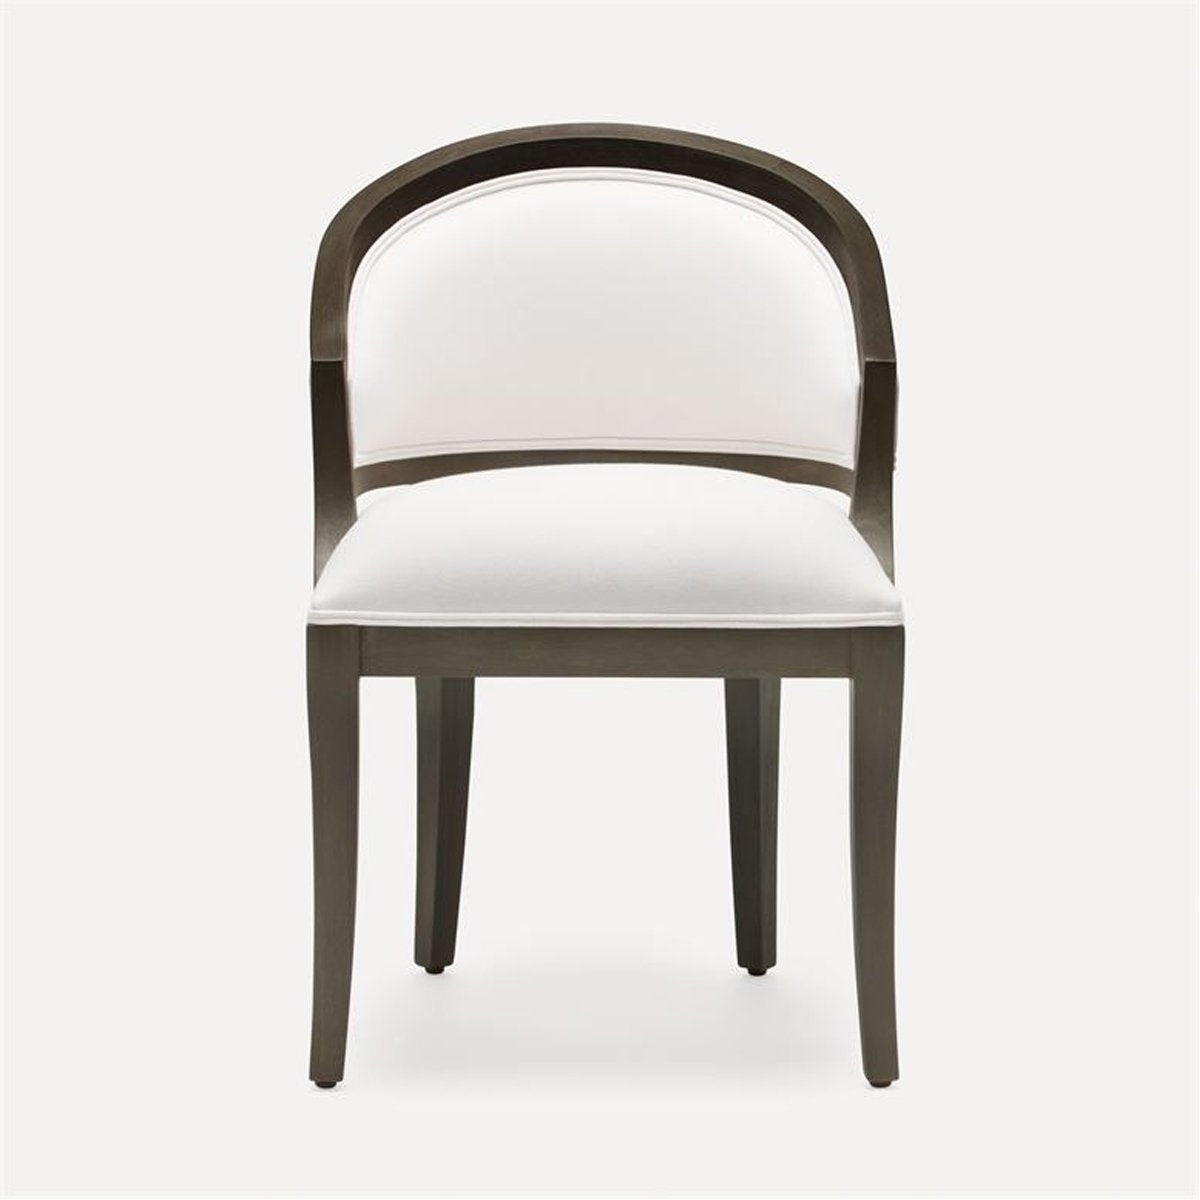 Made Goods Sylvie Curved Back Dining Chair, Brenta Cotton Jute